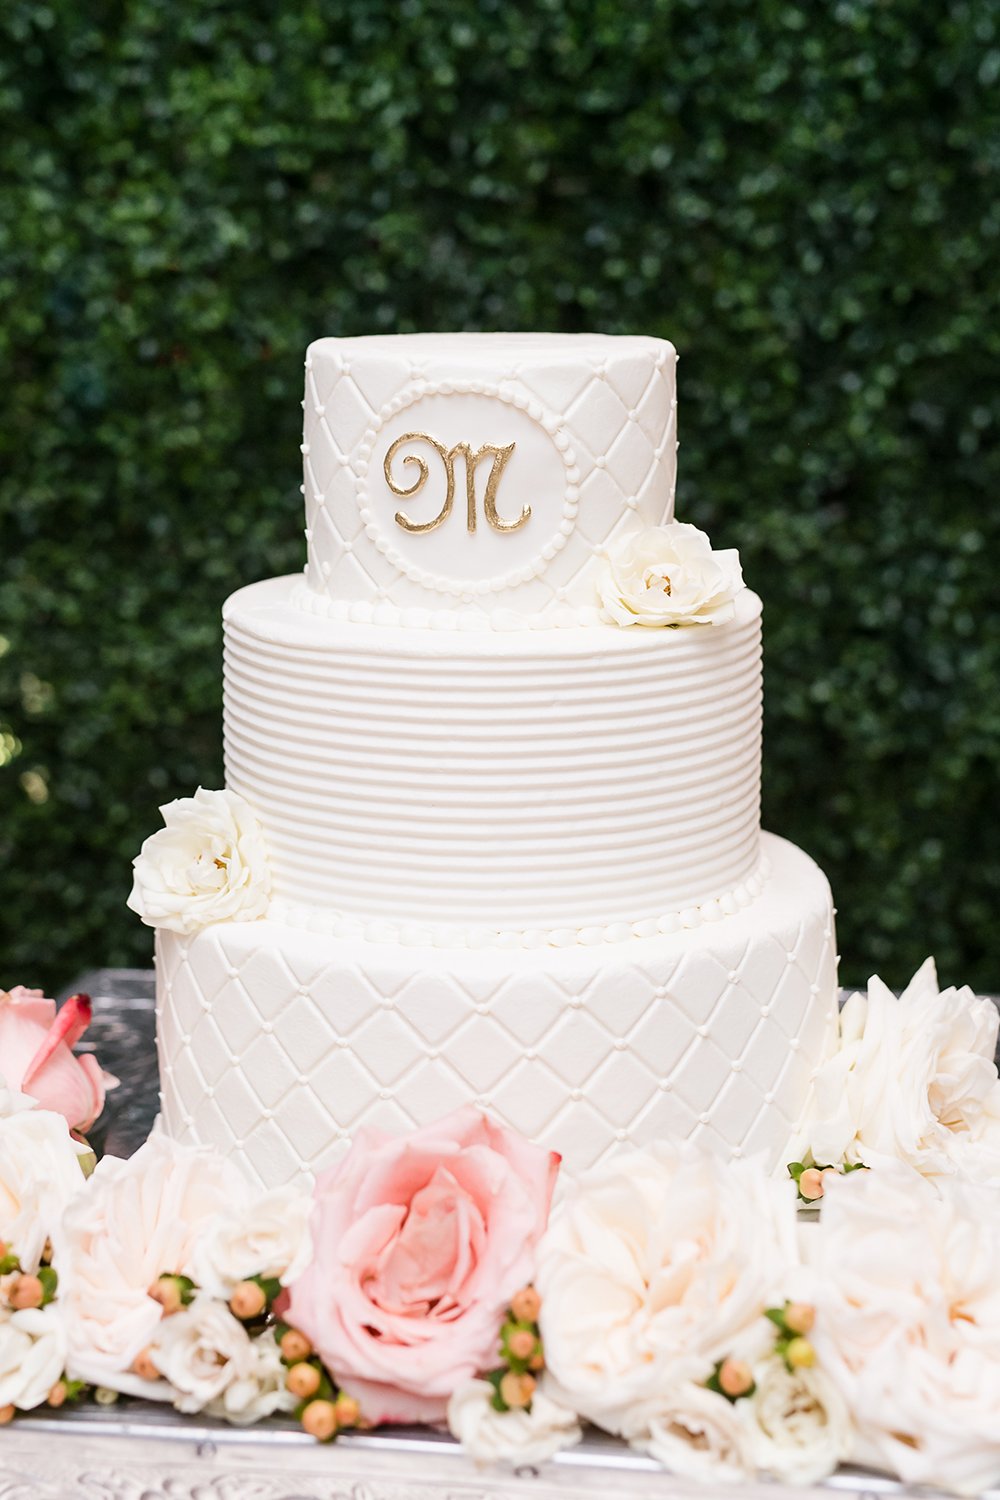 white and gold wedding cake by houston baker susie's cakes and confections